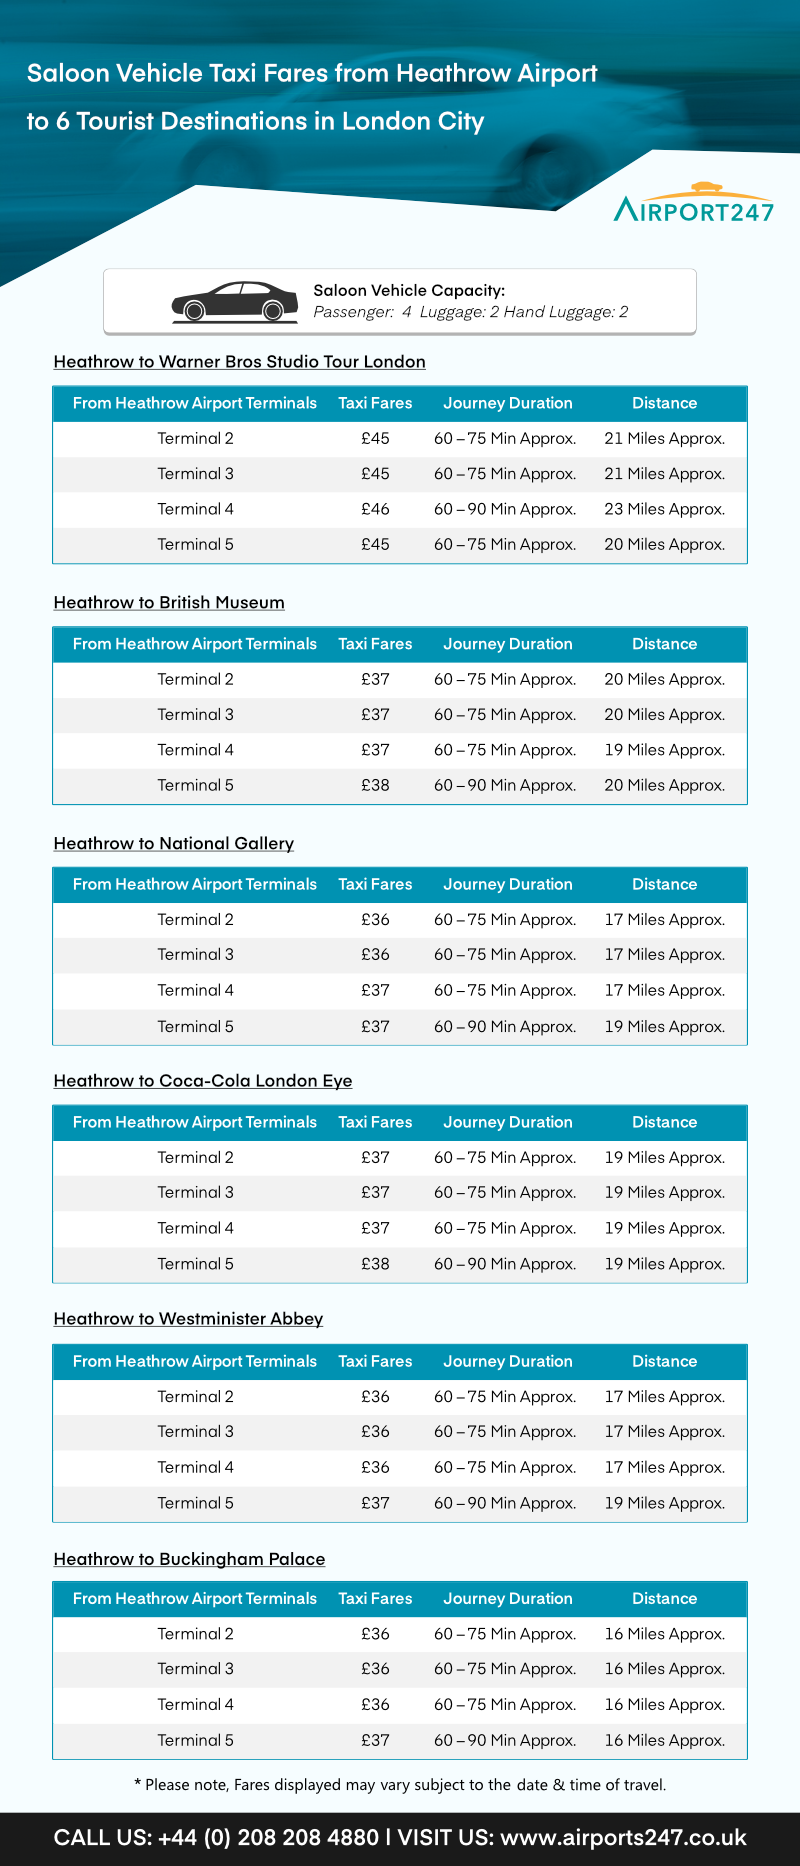 Saloon Vehicle Taxi Fares from Heathrow Airport to 6 Tourist Destinations in London City